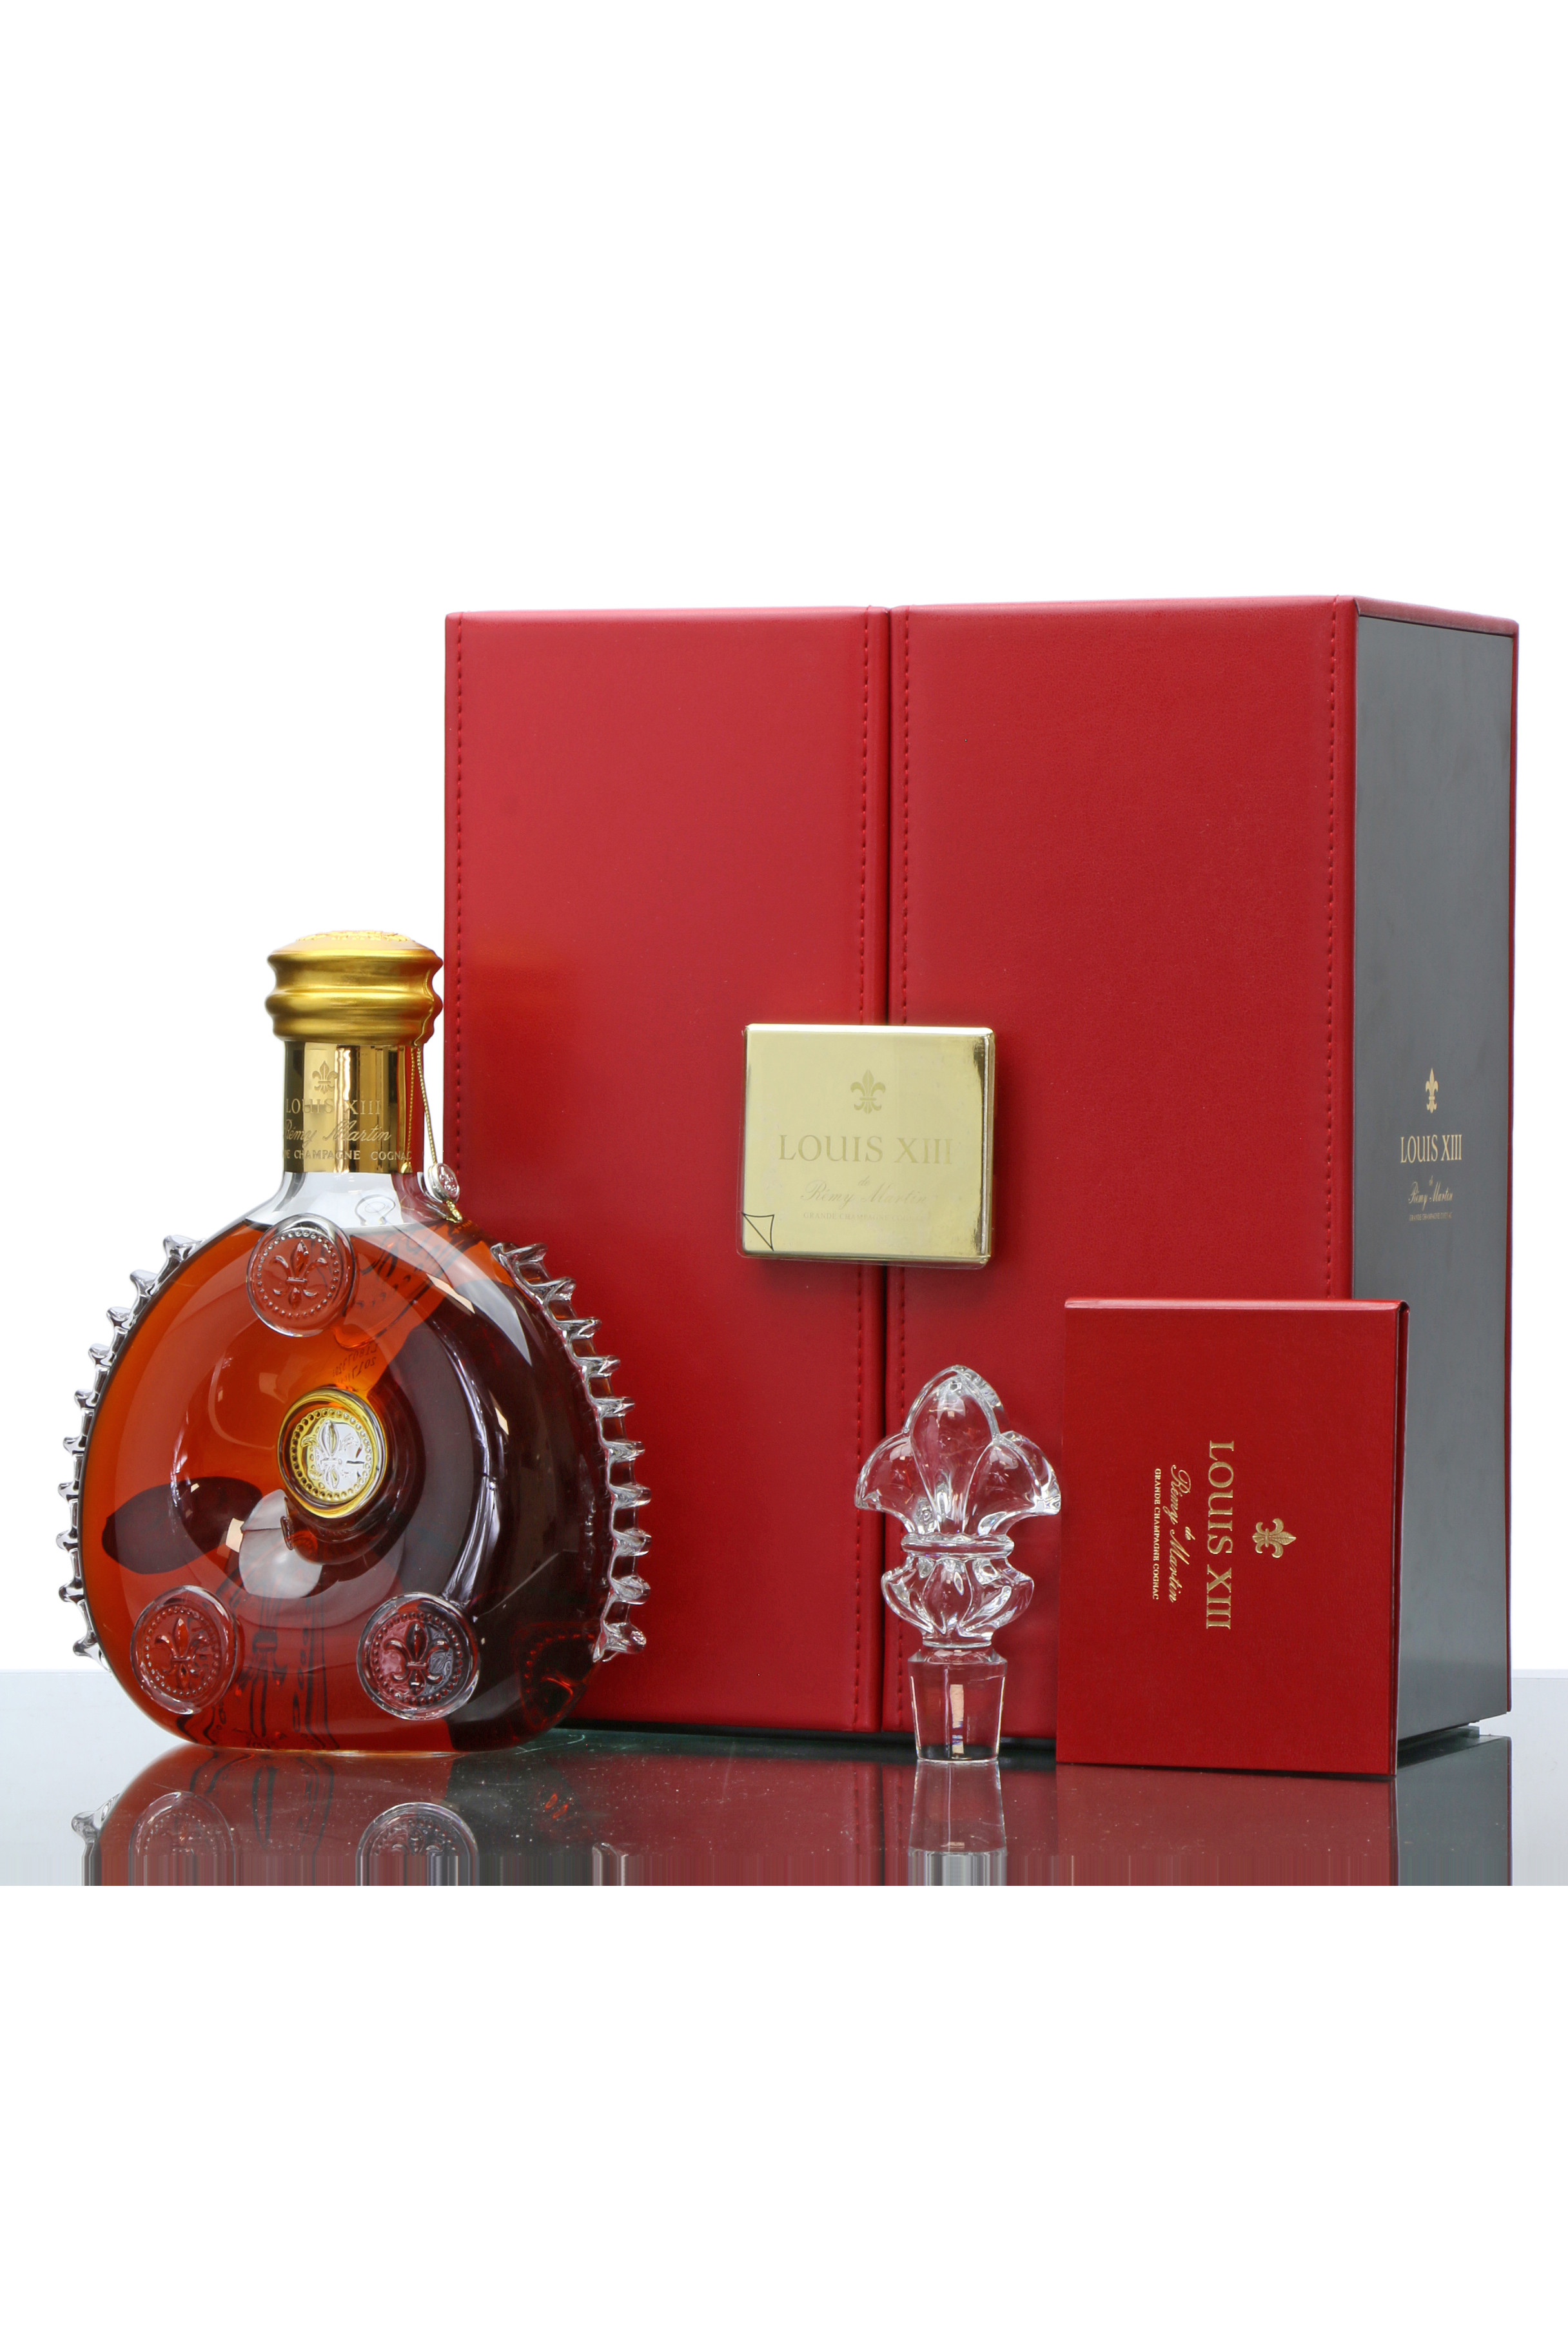 A Baccarat Remy Martin Louis XIII Grande Champagne Cognac Crystal